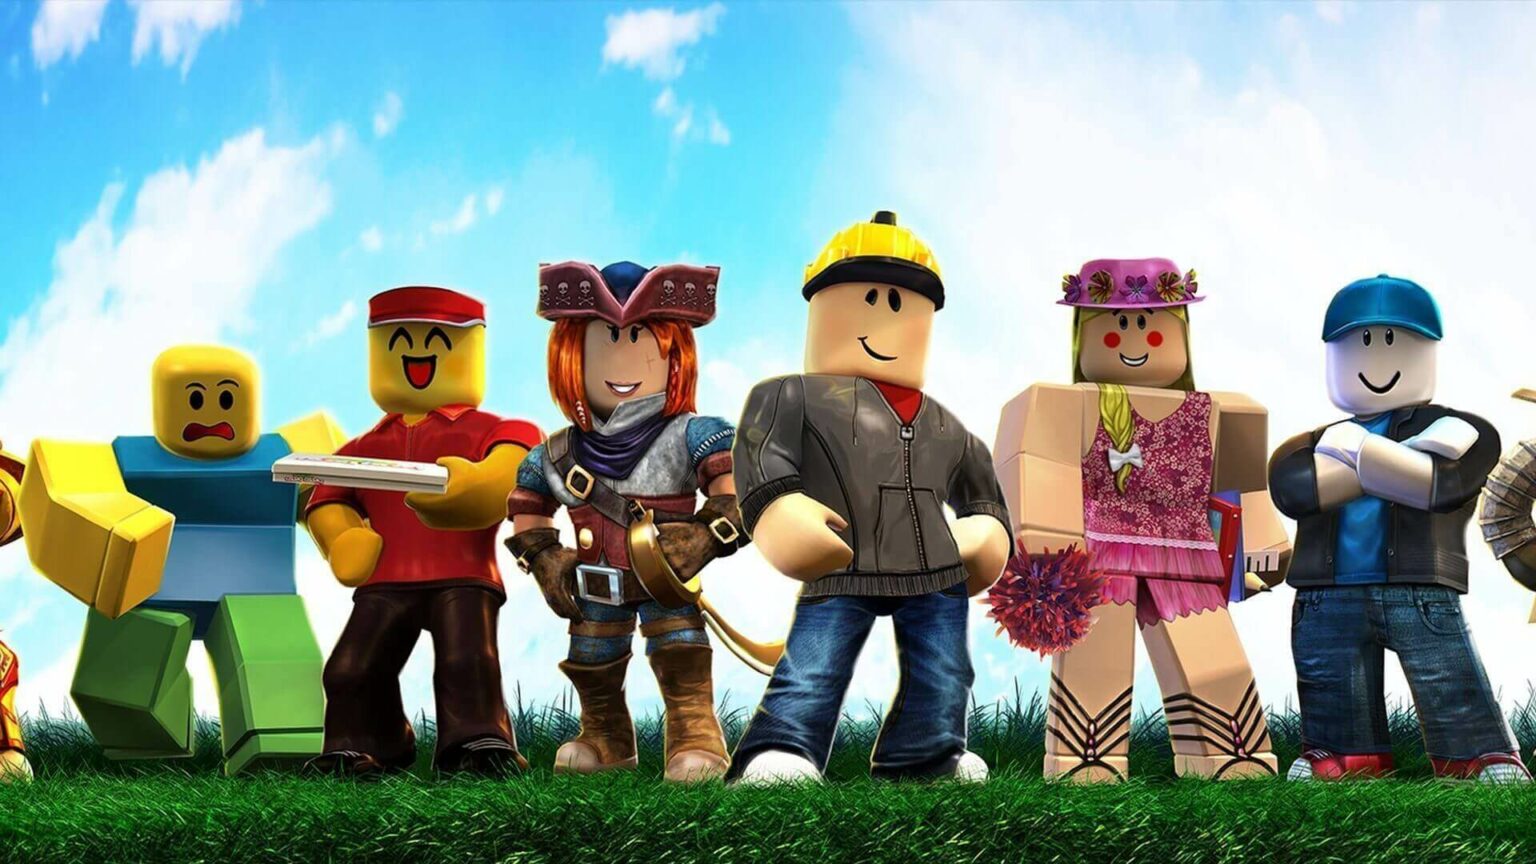 Roblox leads cloud gaming revolution